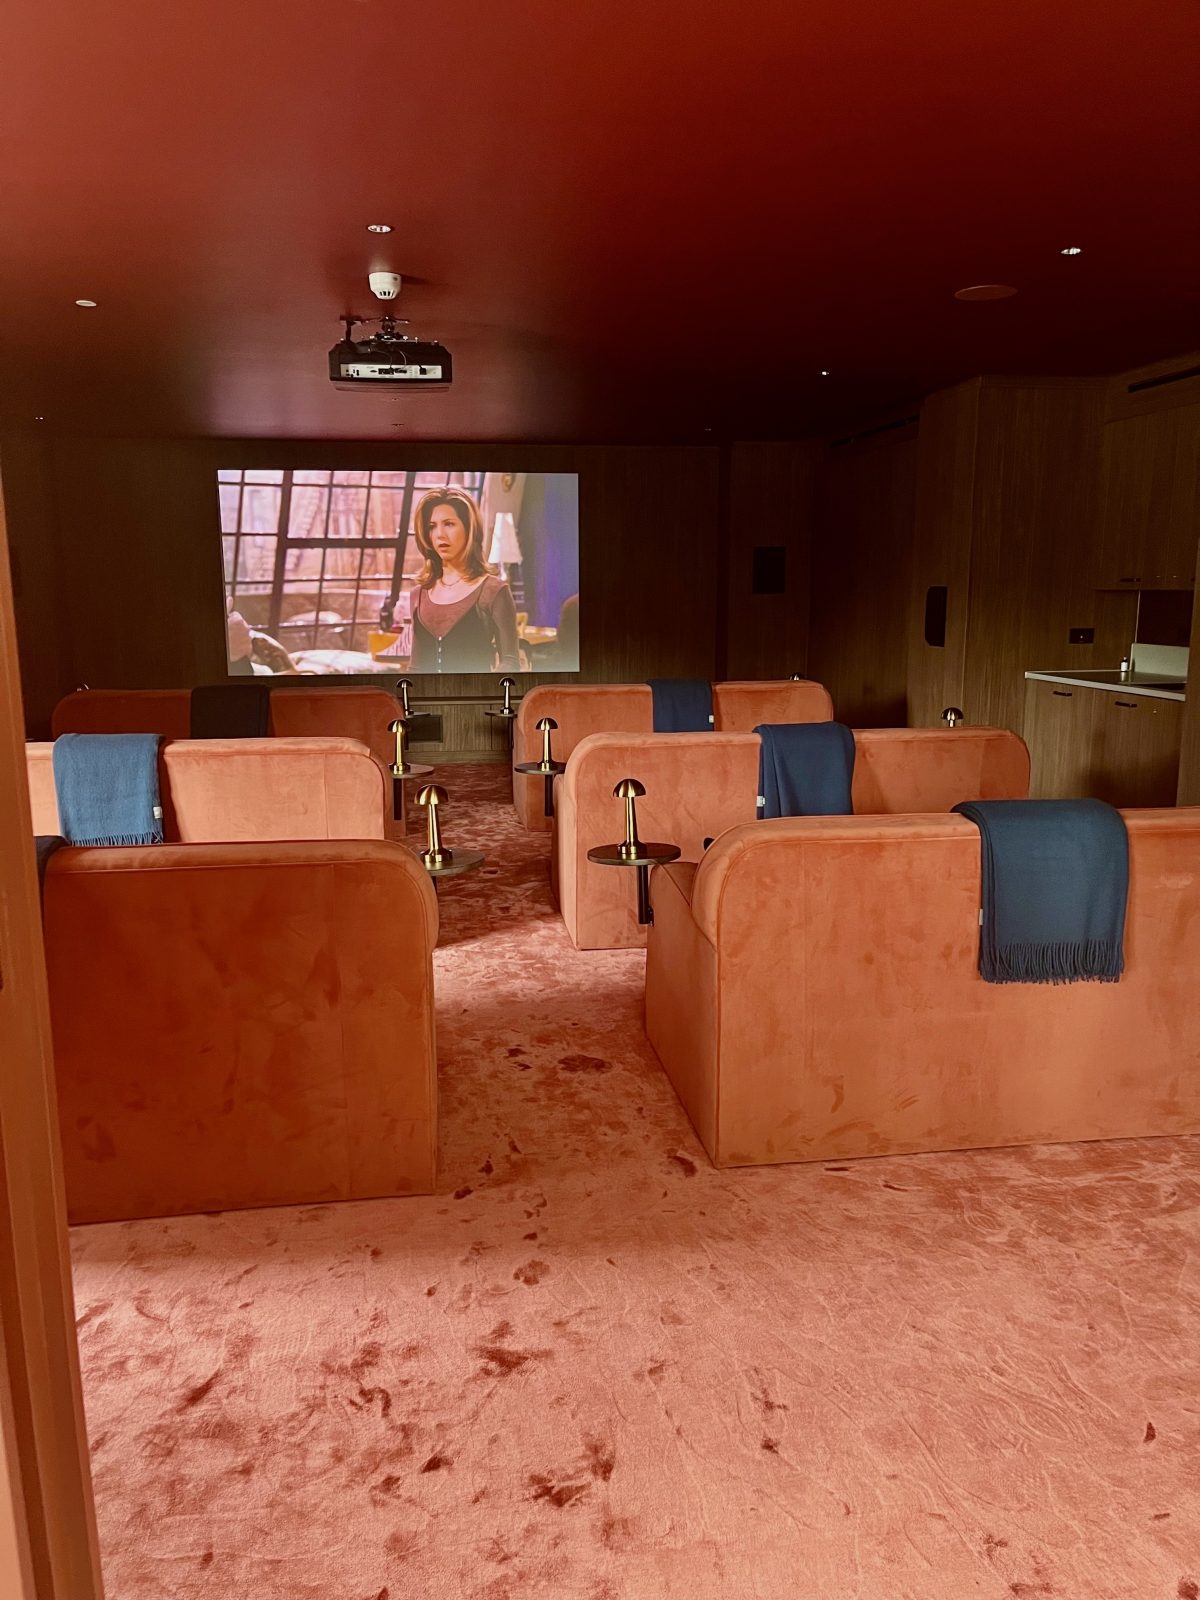 Moda, New York Square in Leeds has its own cosy cinema room